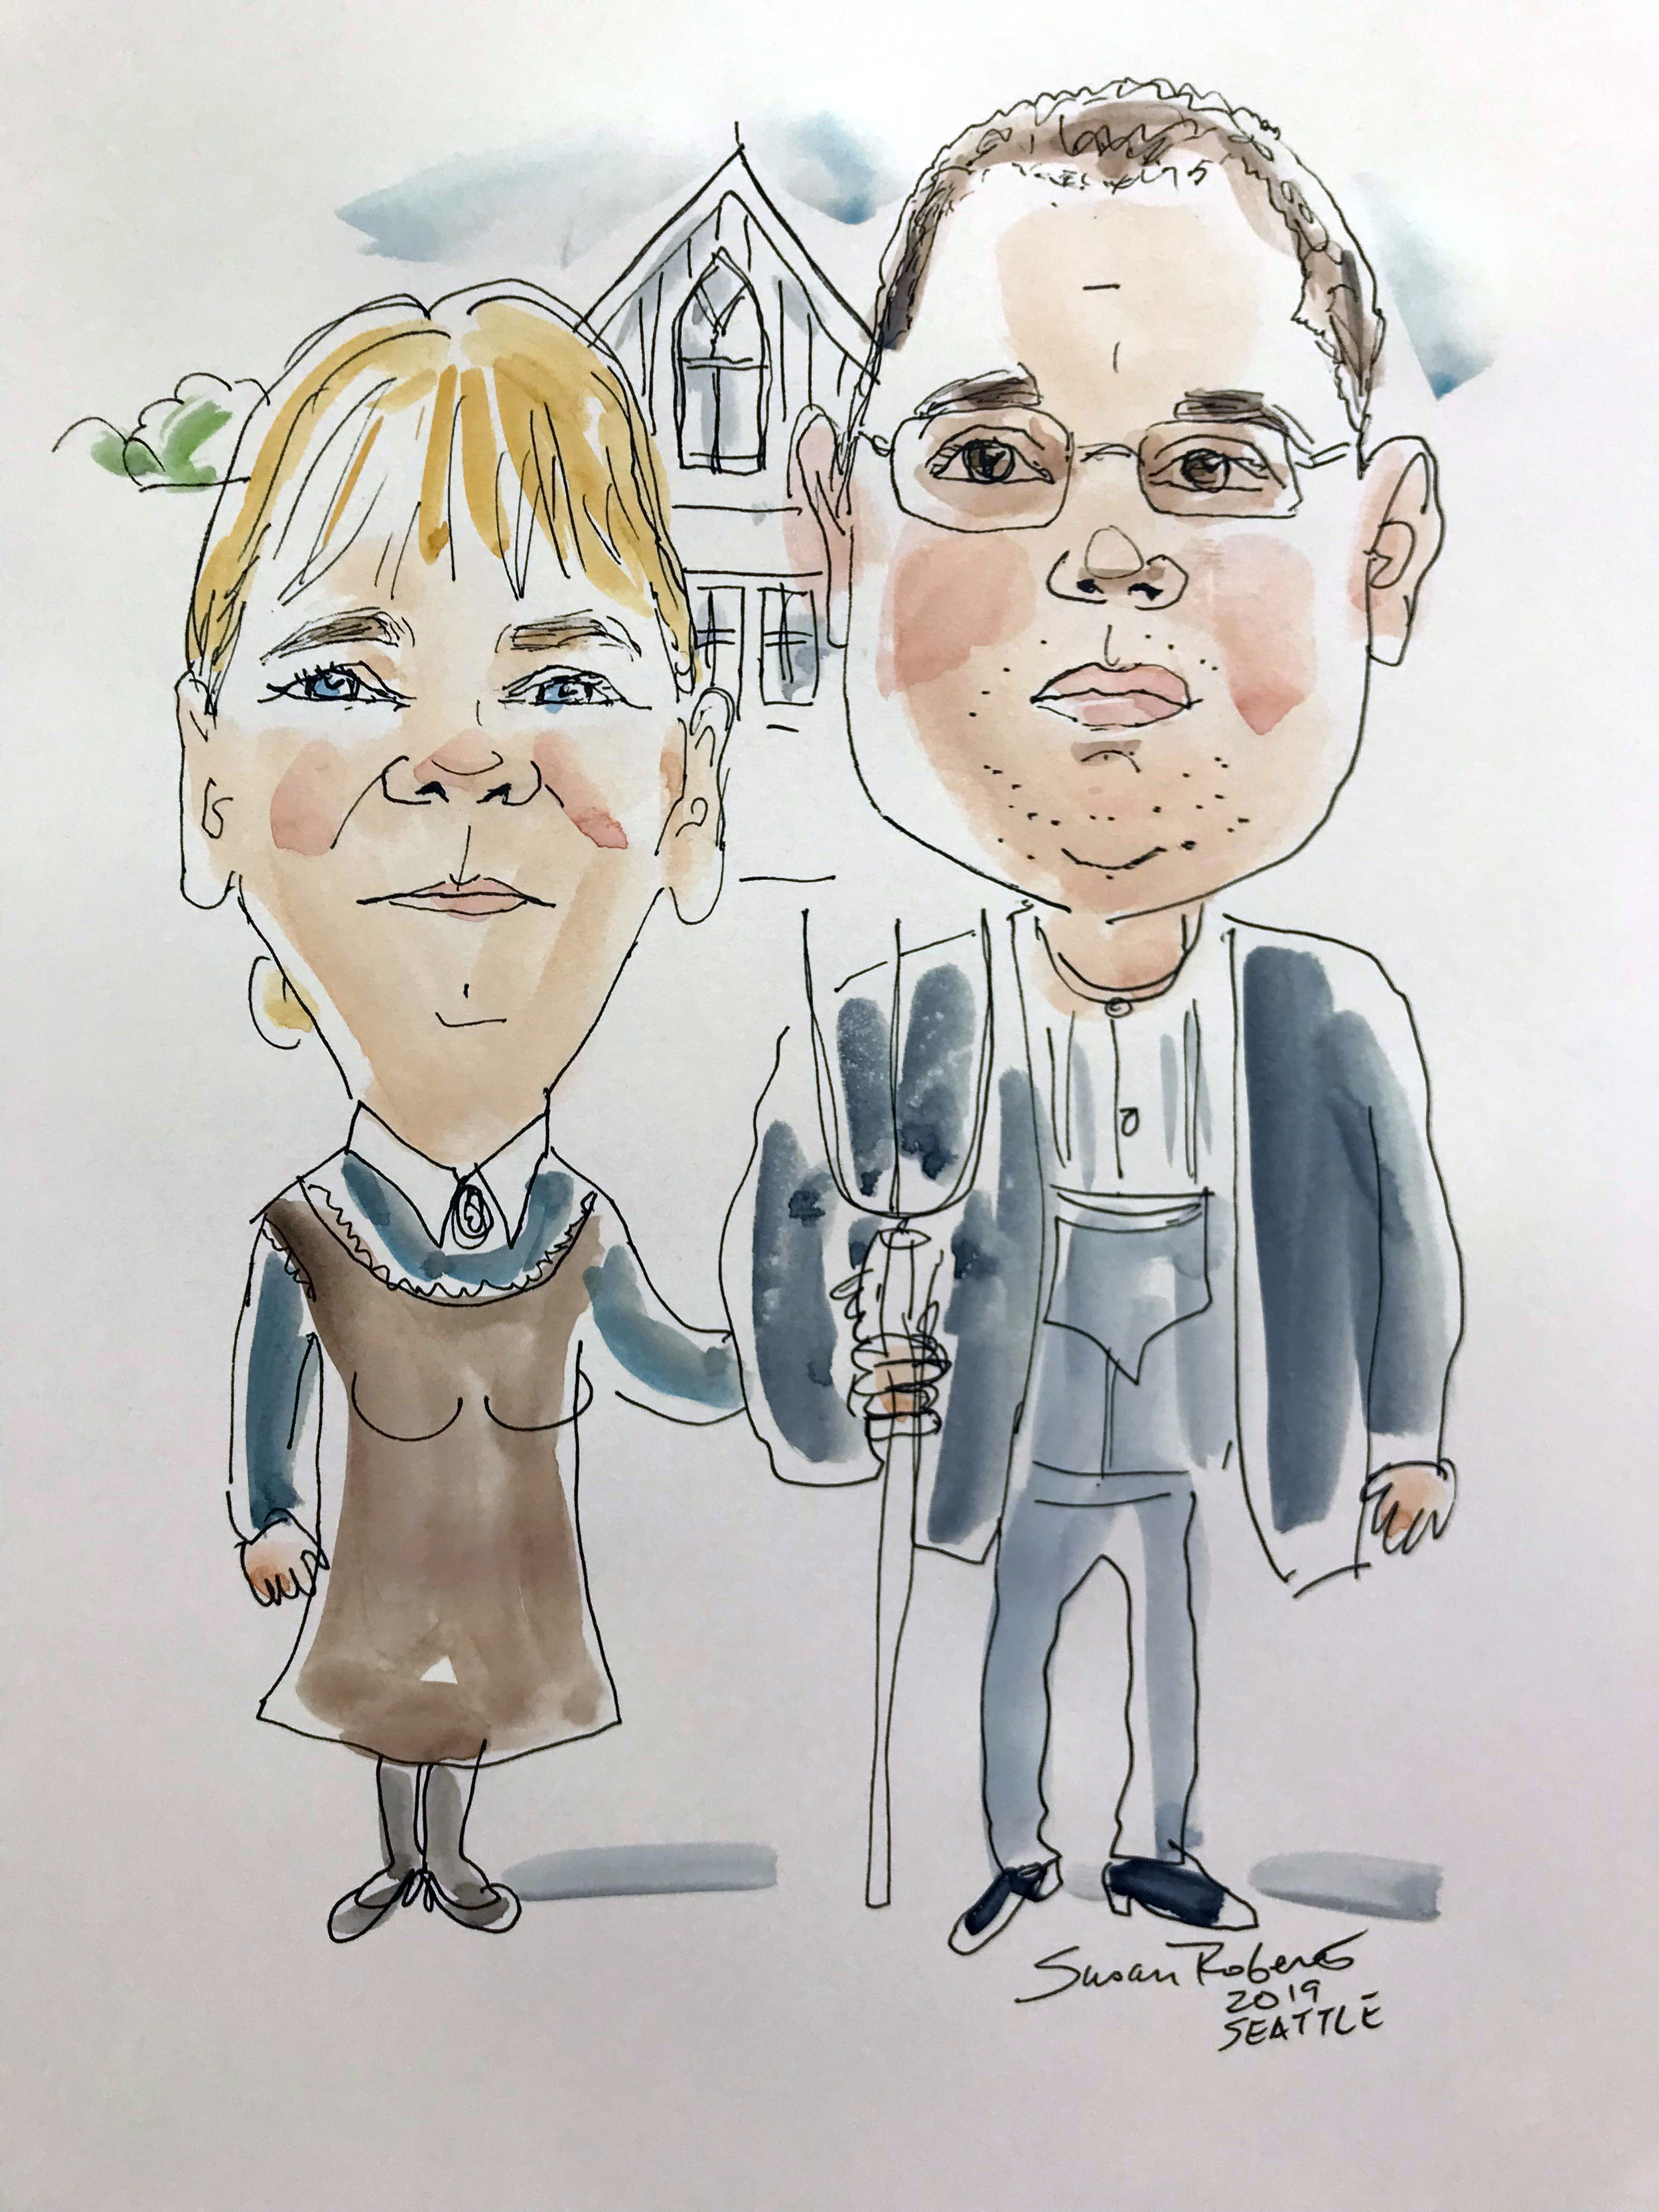 Group caricature with watercolor wash